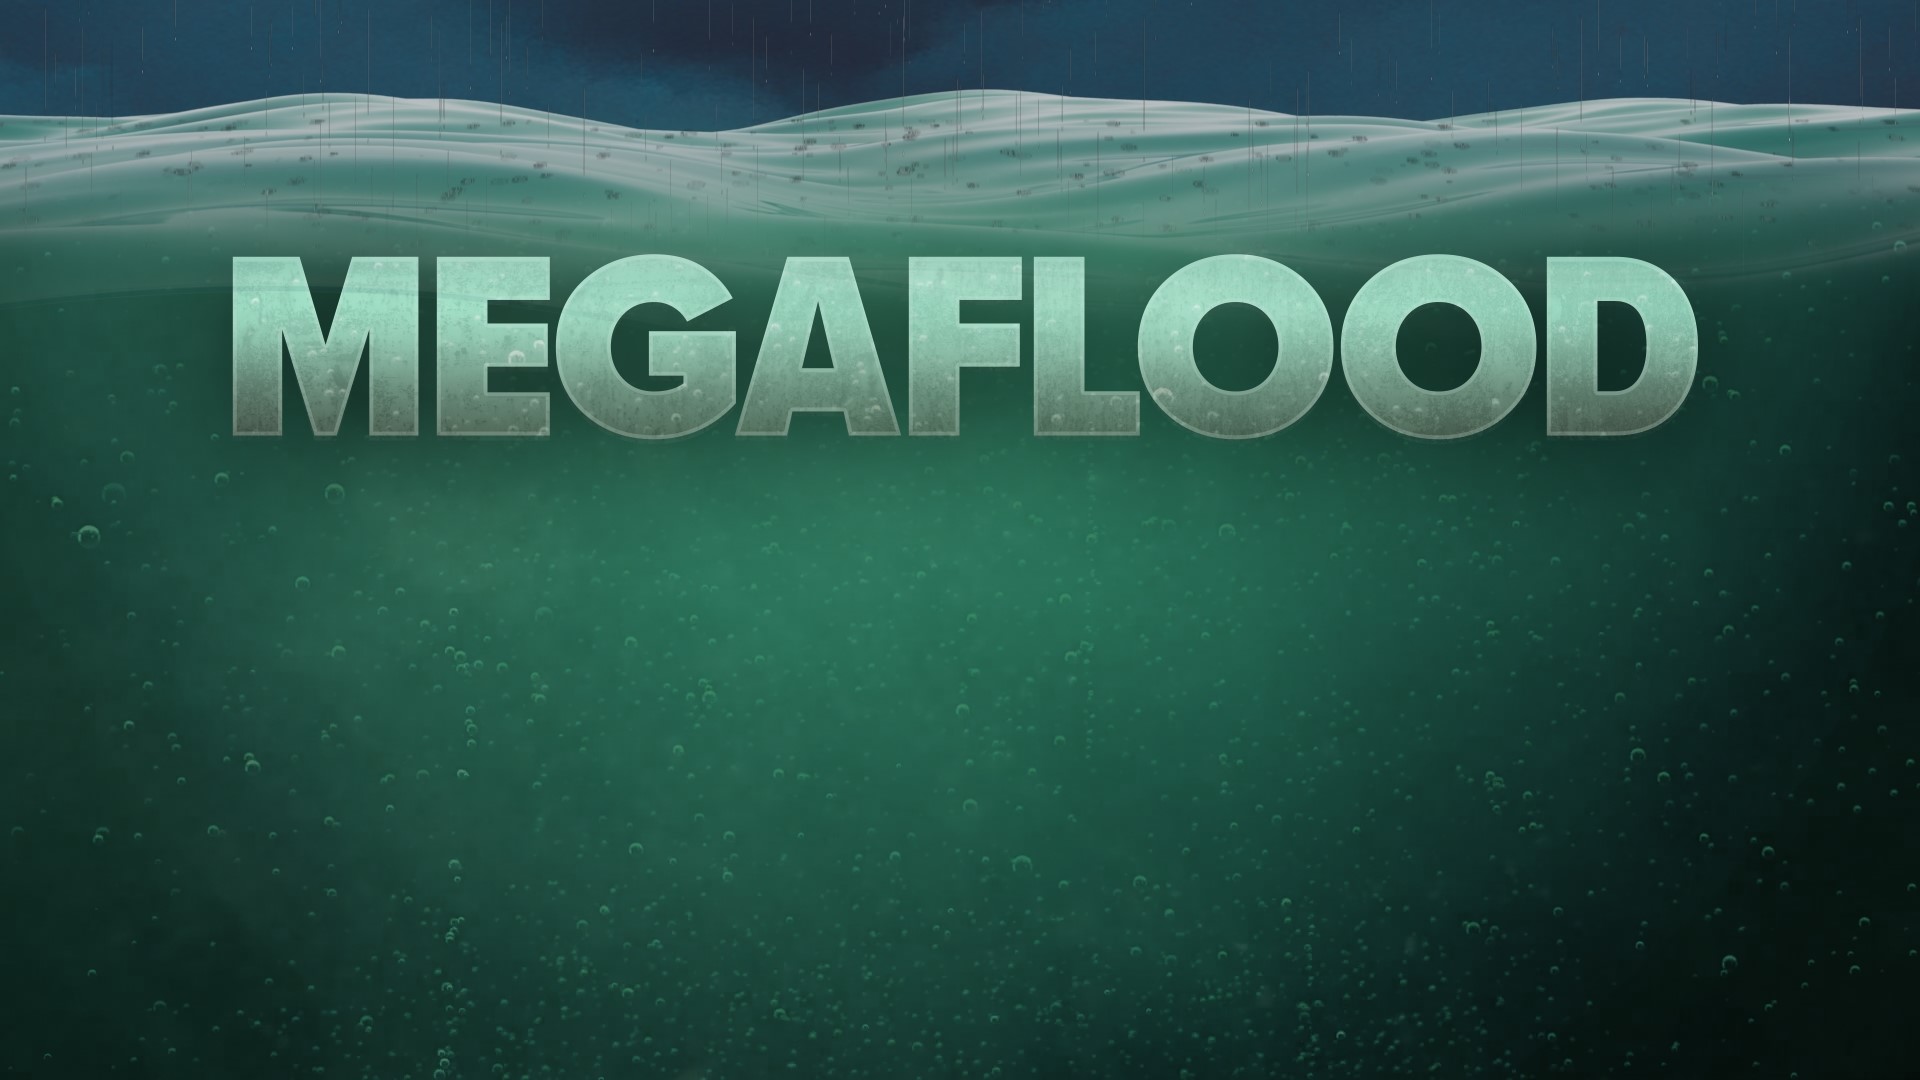 New research indicates 'megafloods' are twice as likely in the future due to our changing climate.